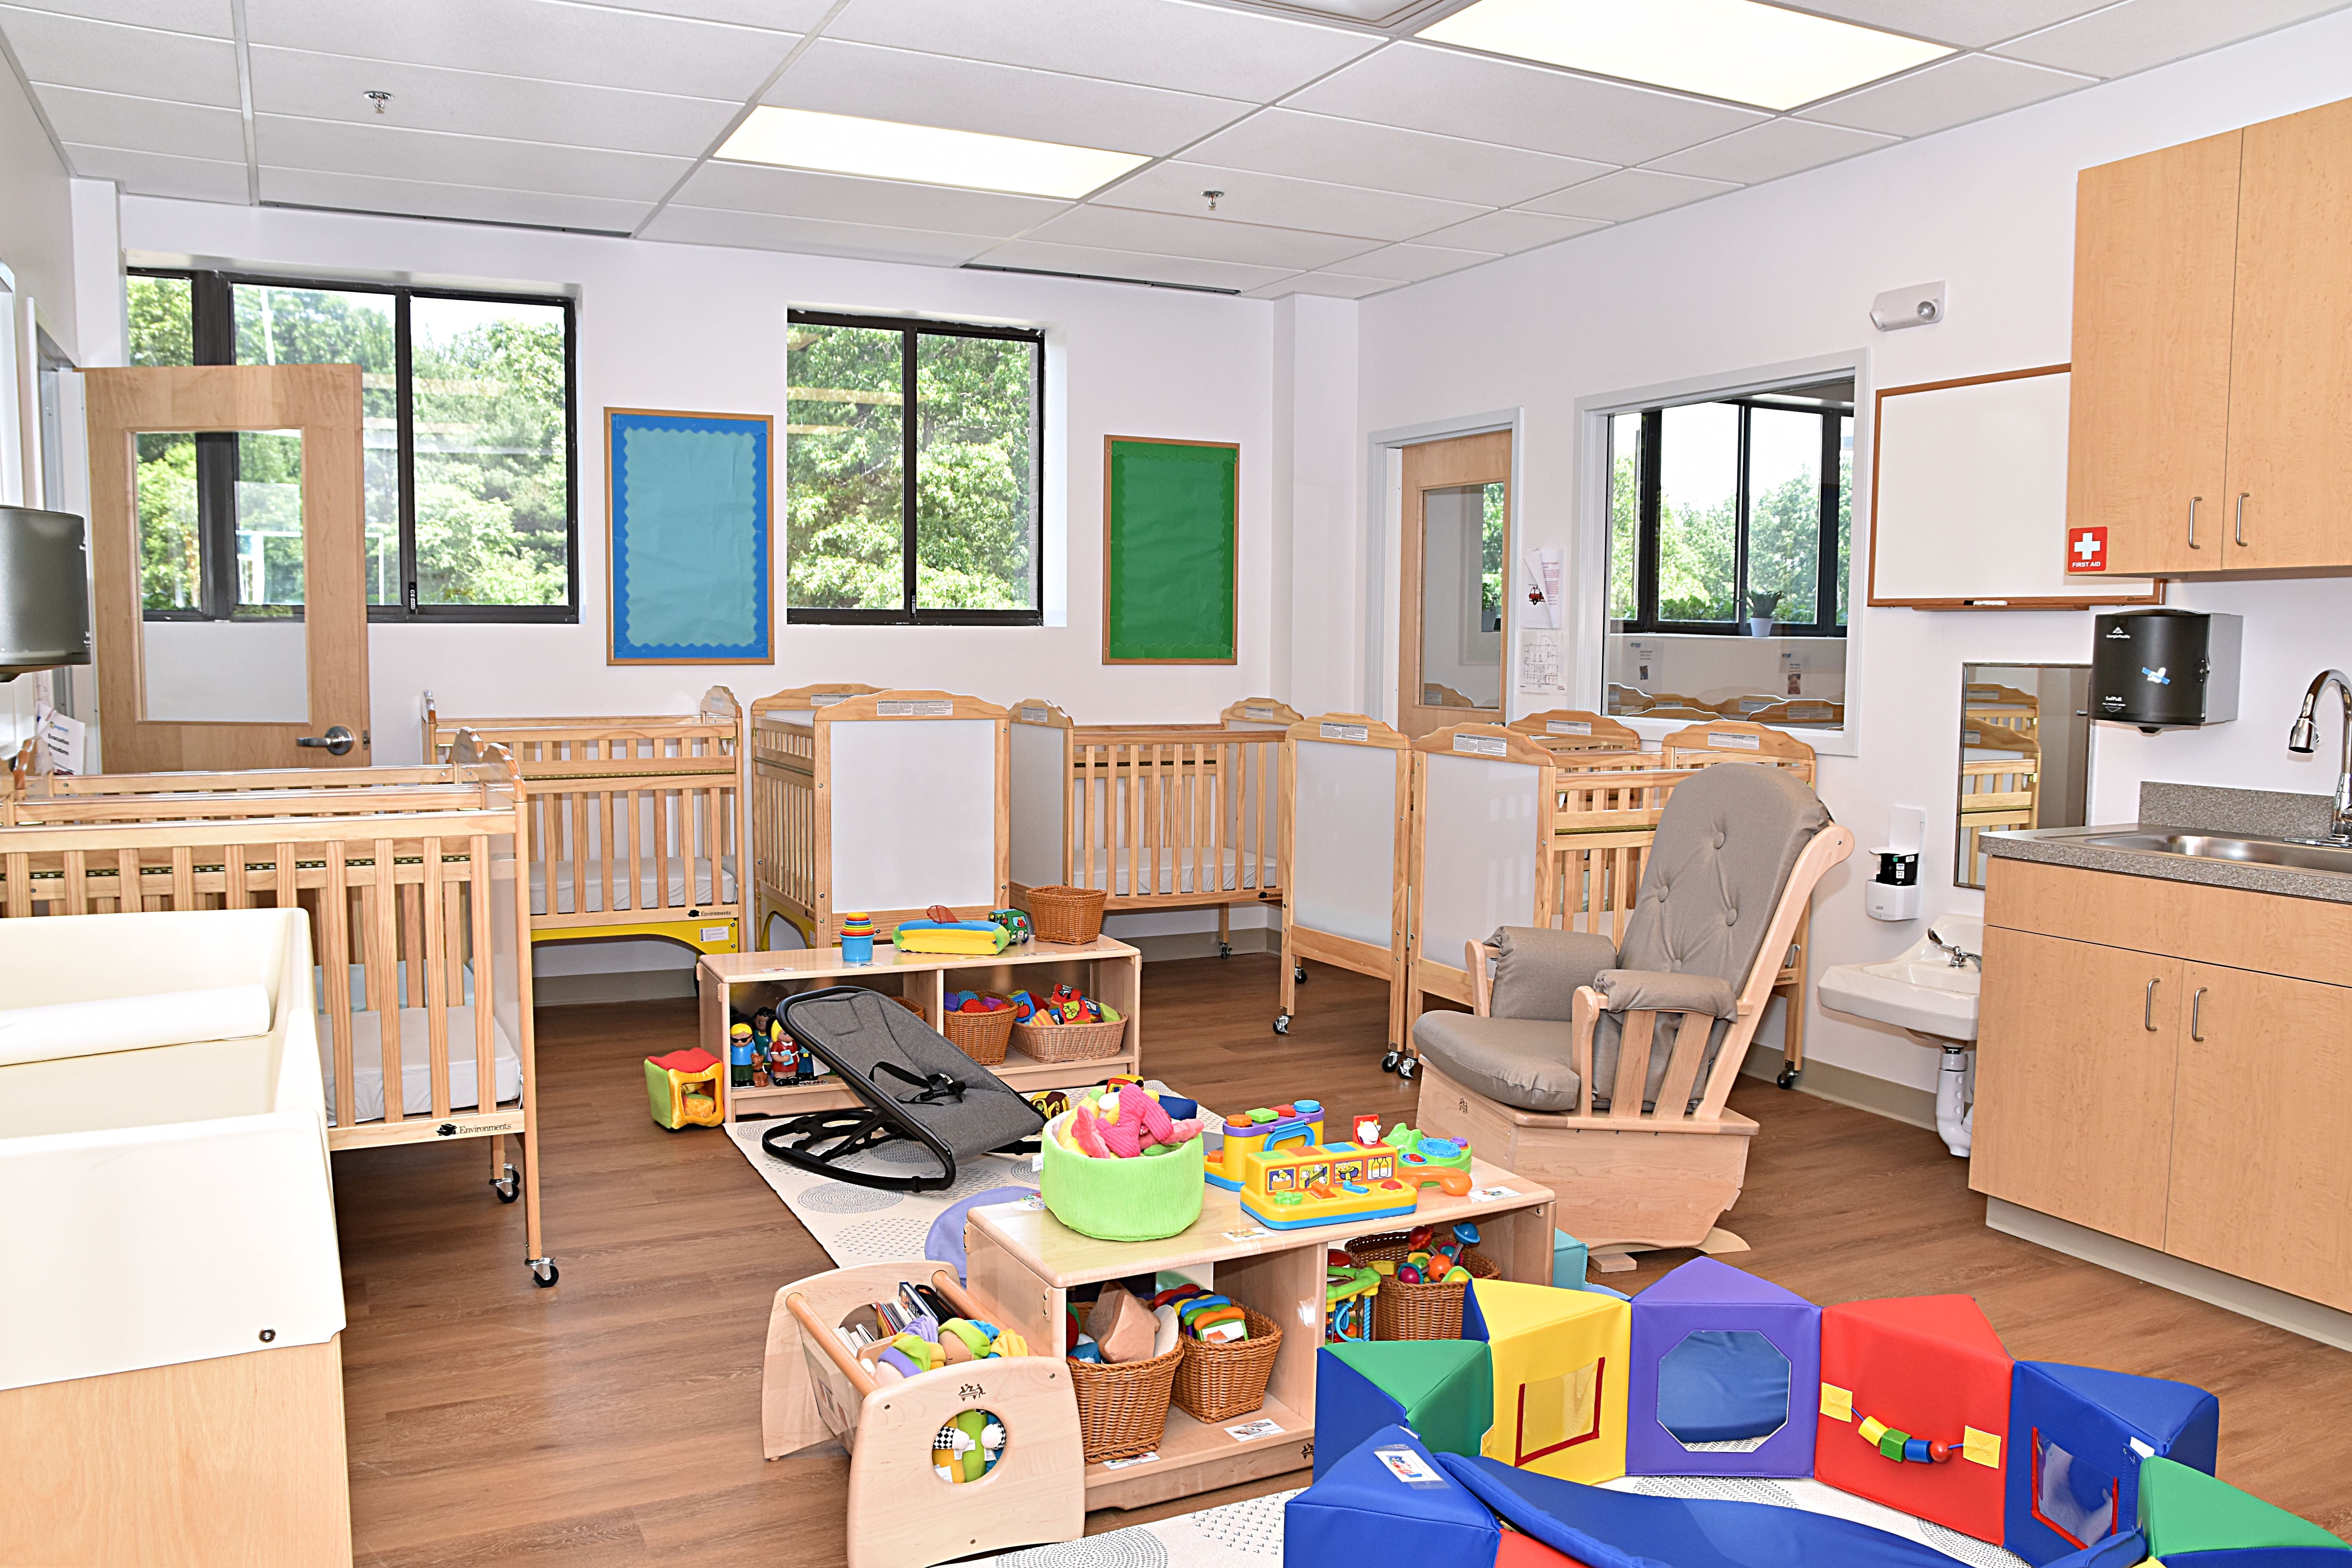 BrightPath Medway is a premium child care center near you. Here's a peek inside the infant room.